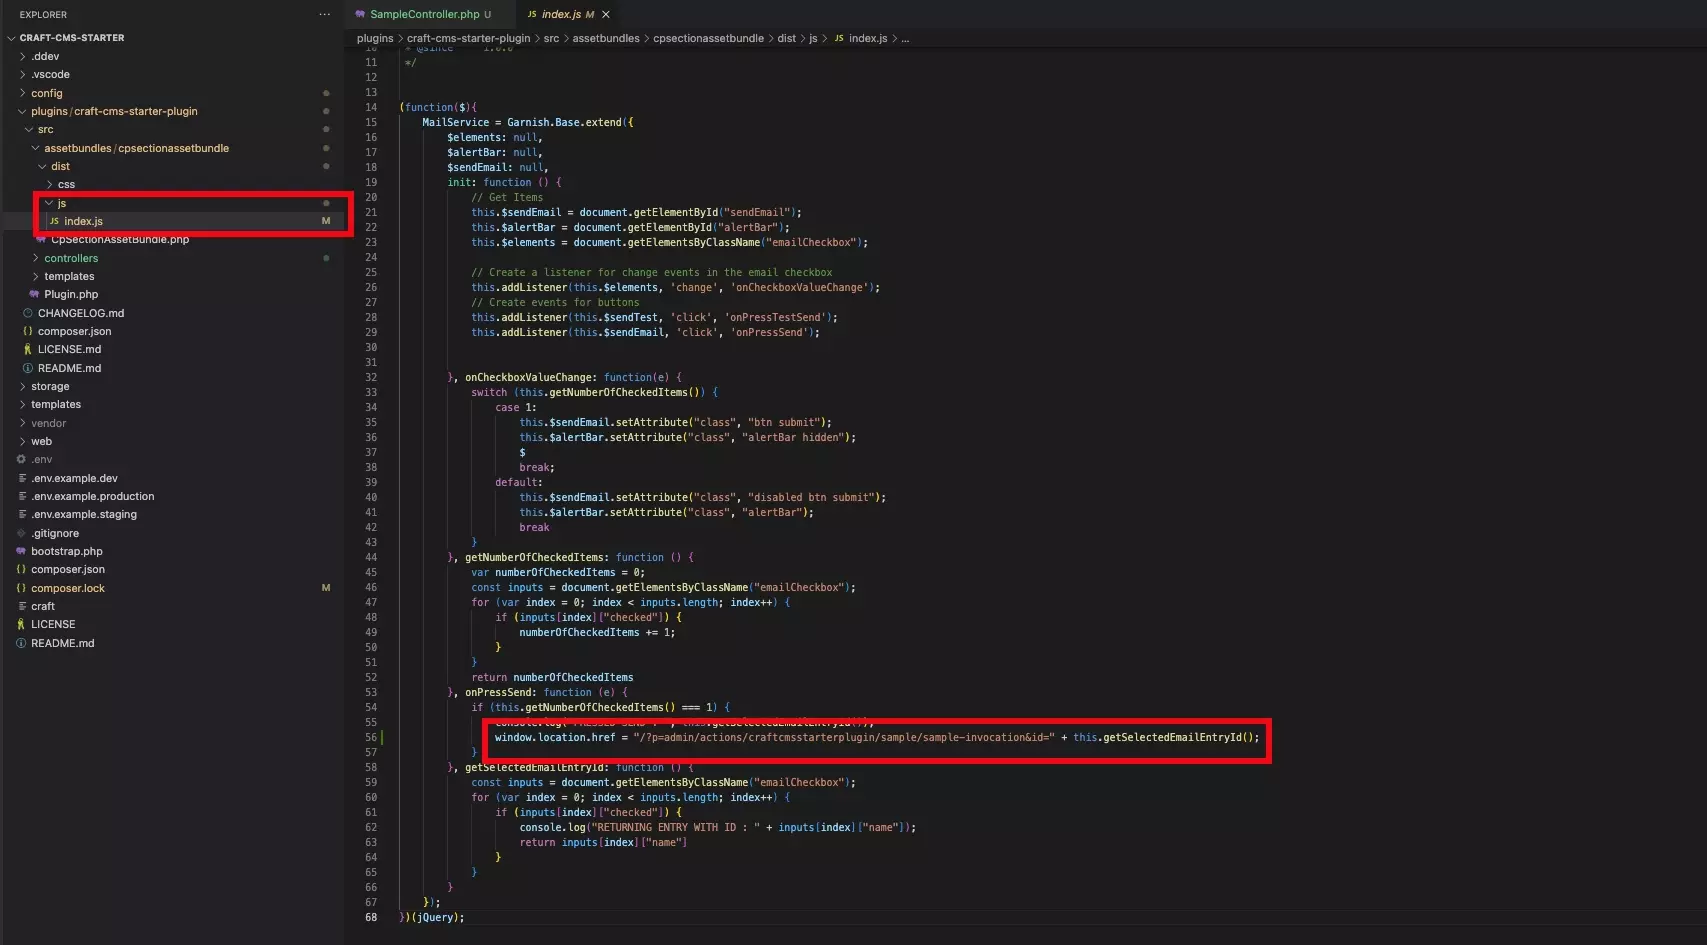 A screenshot of VSCode showing the JS update that we made to call the controller action.